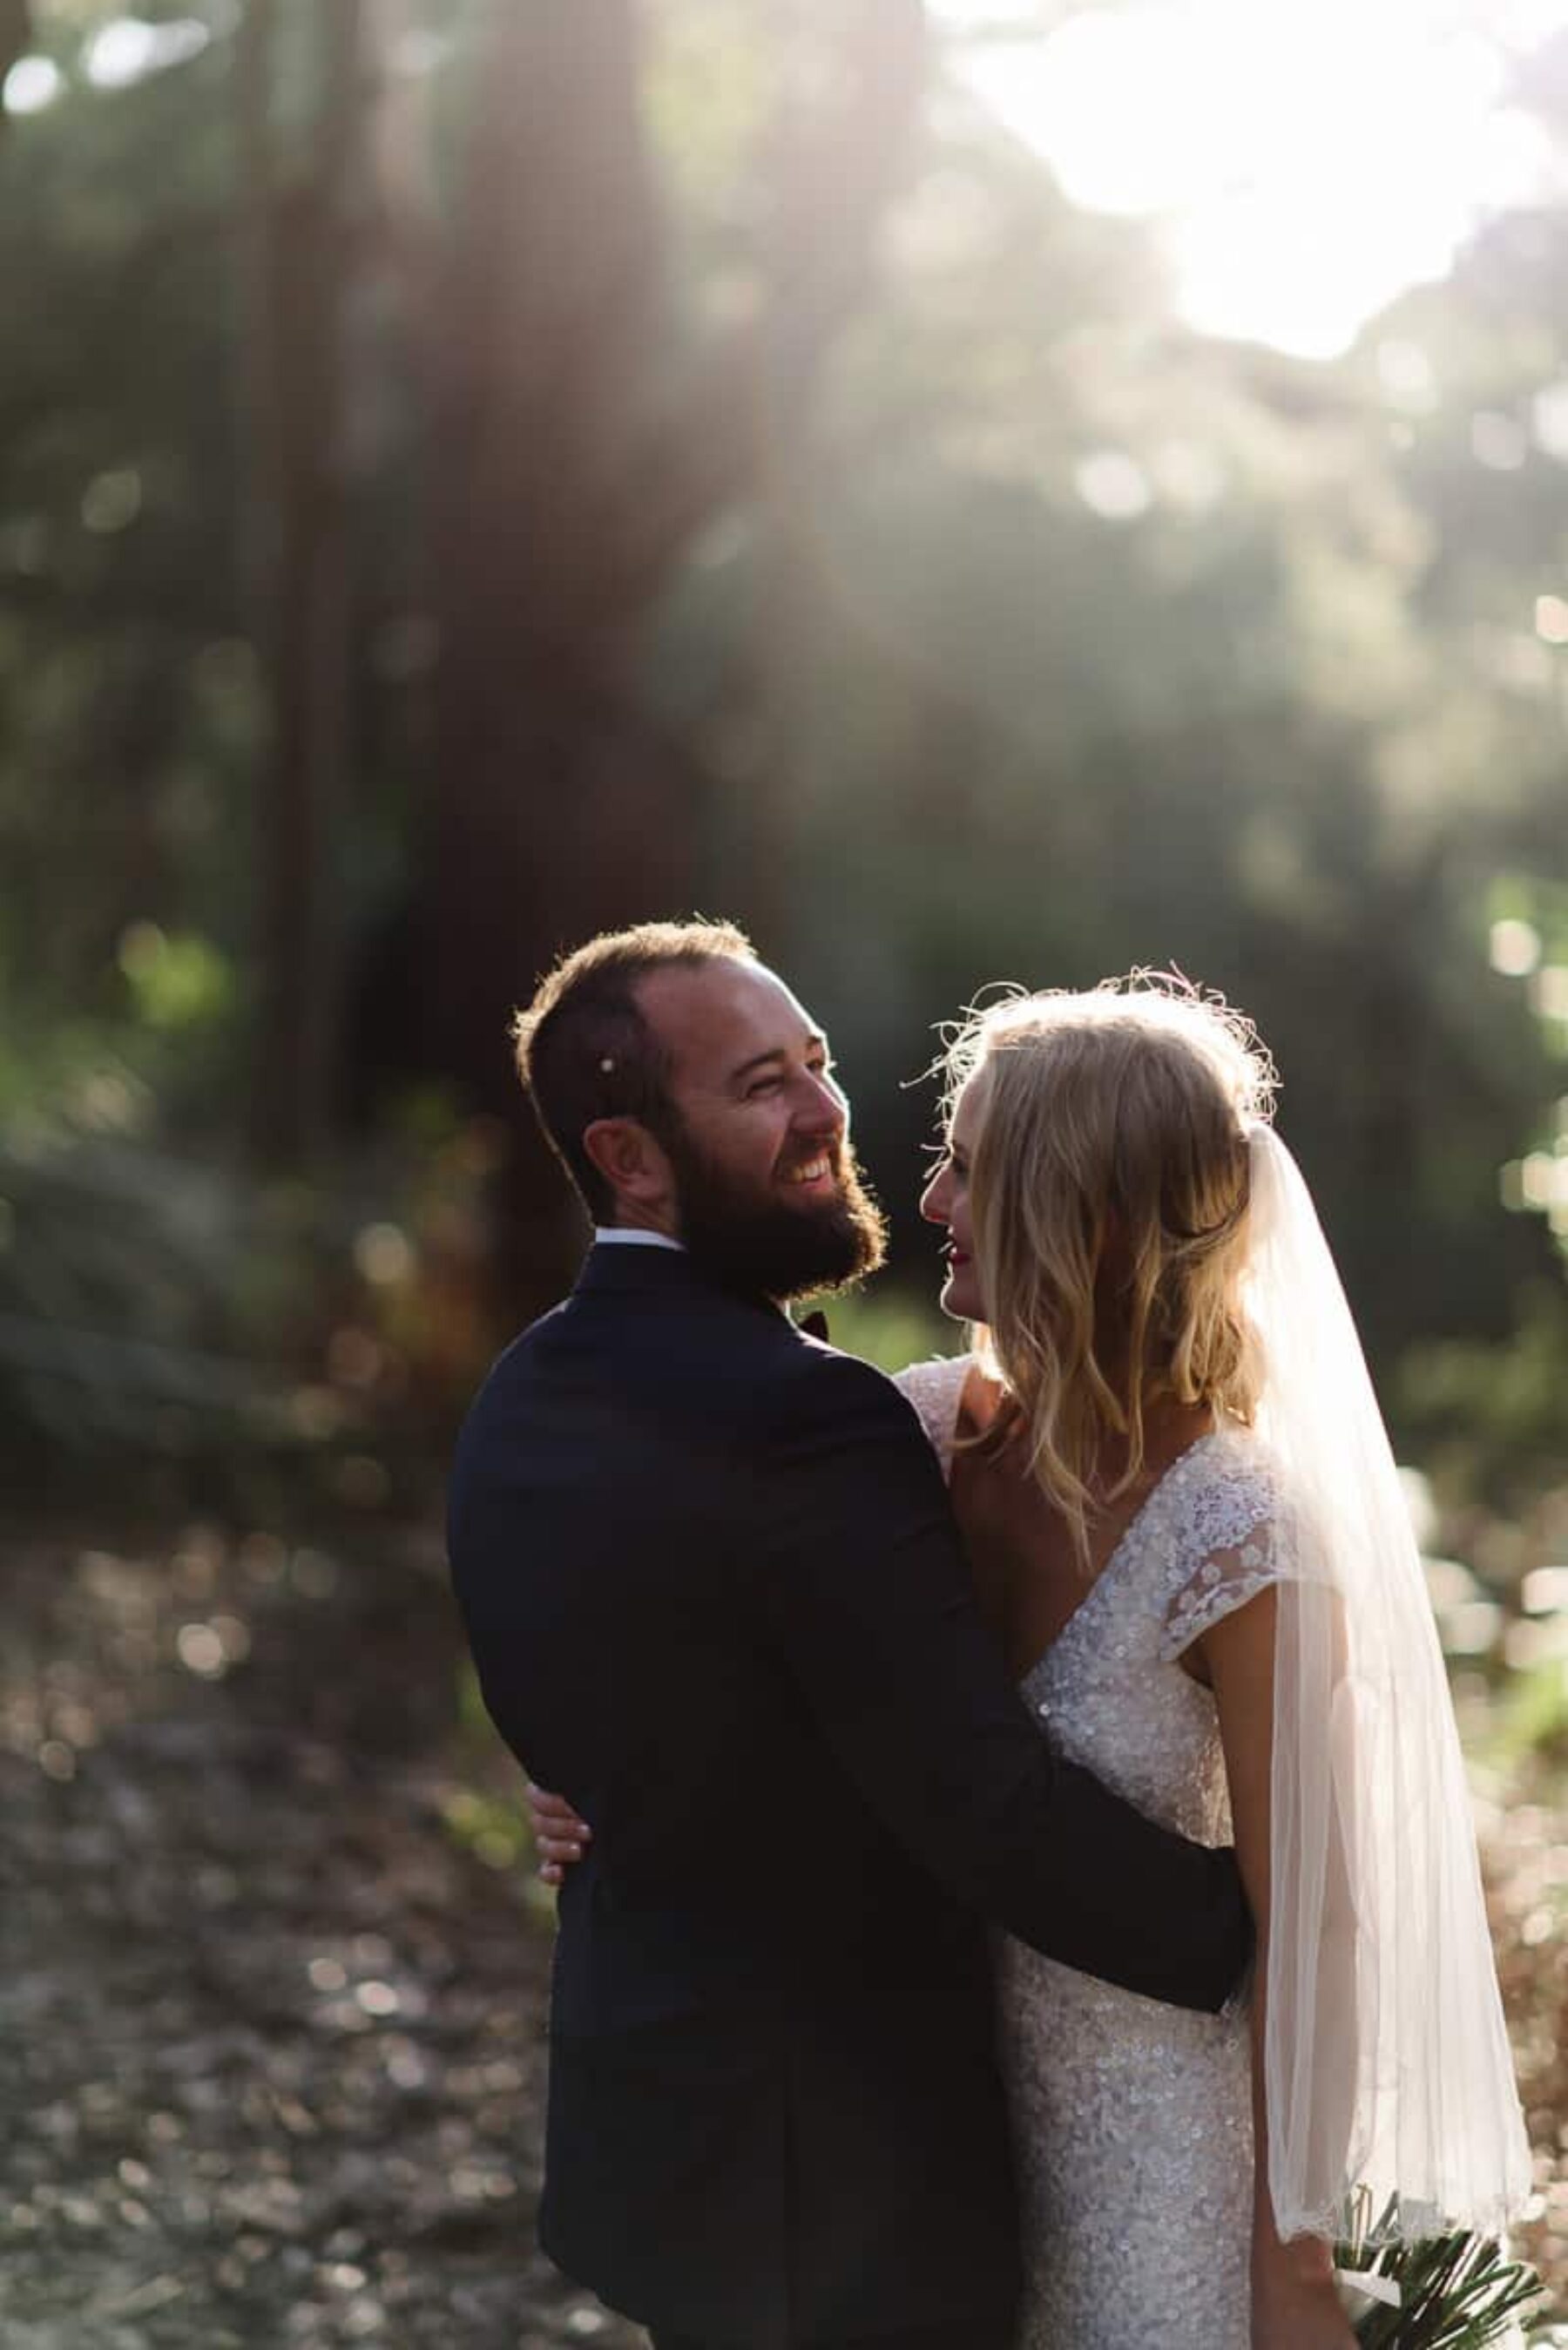 Winter forest wedding, Terrigal NSW / Photography by Keelan Christopher